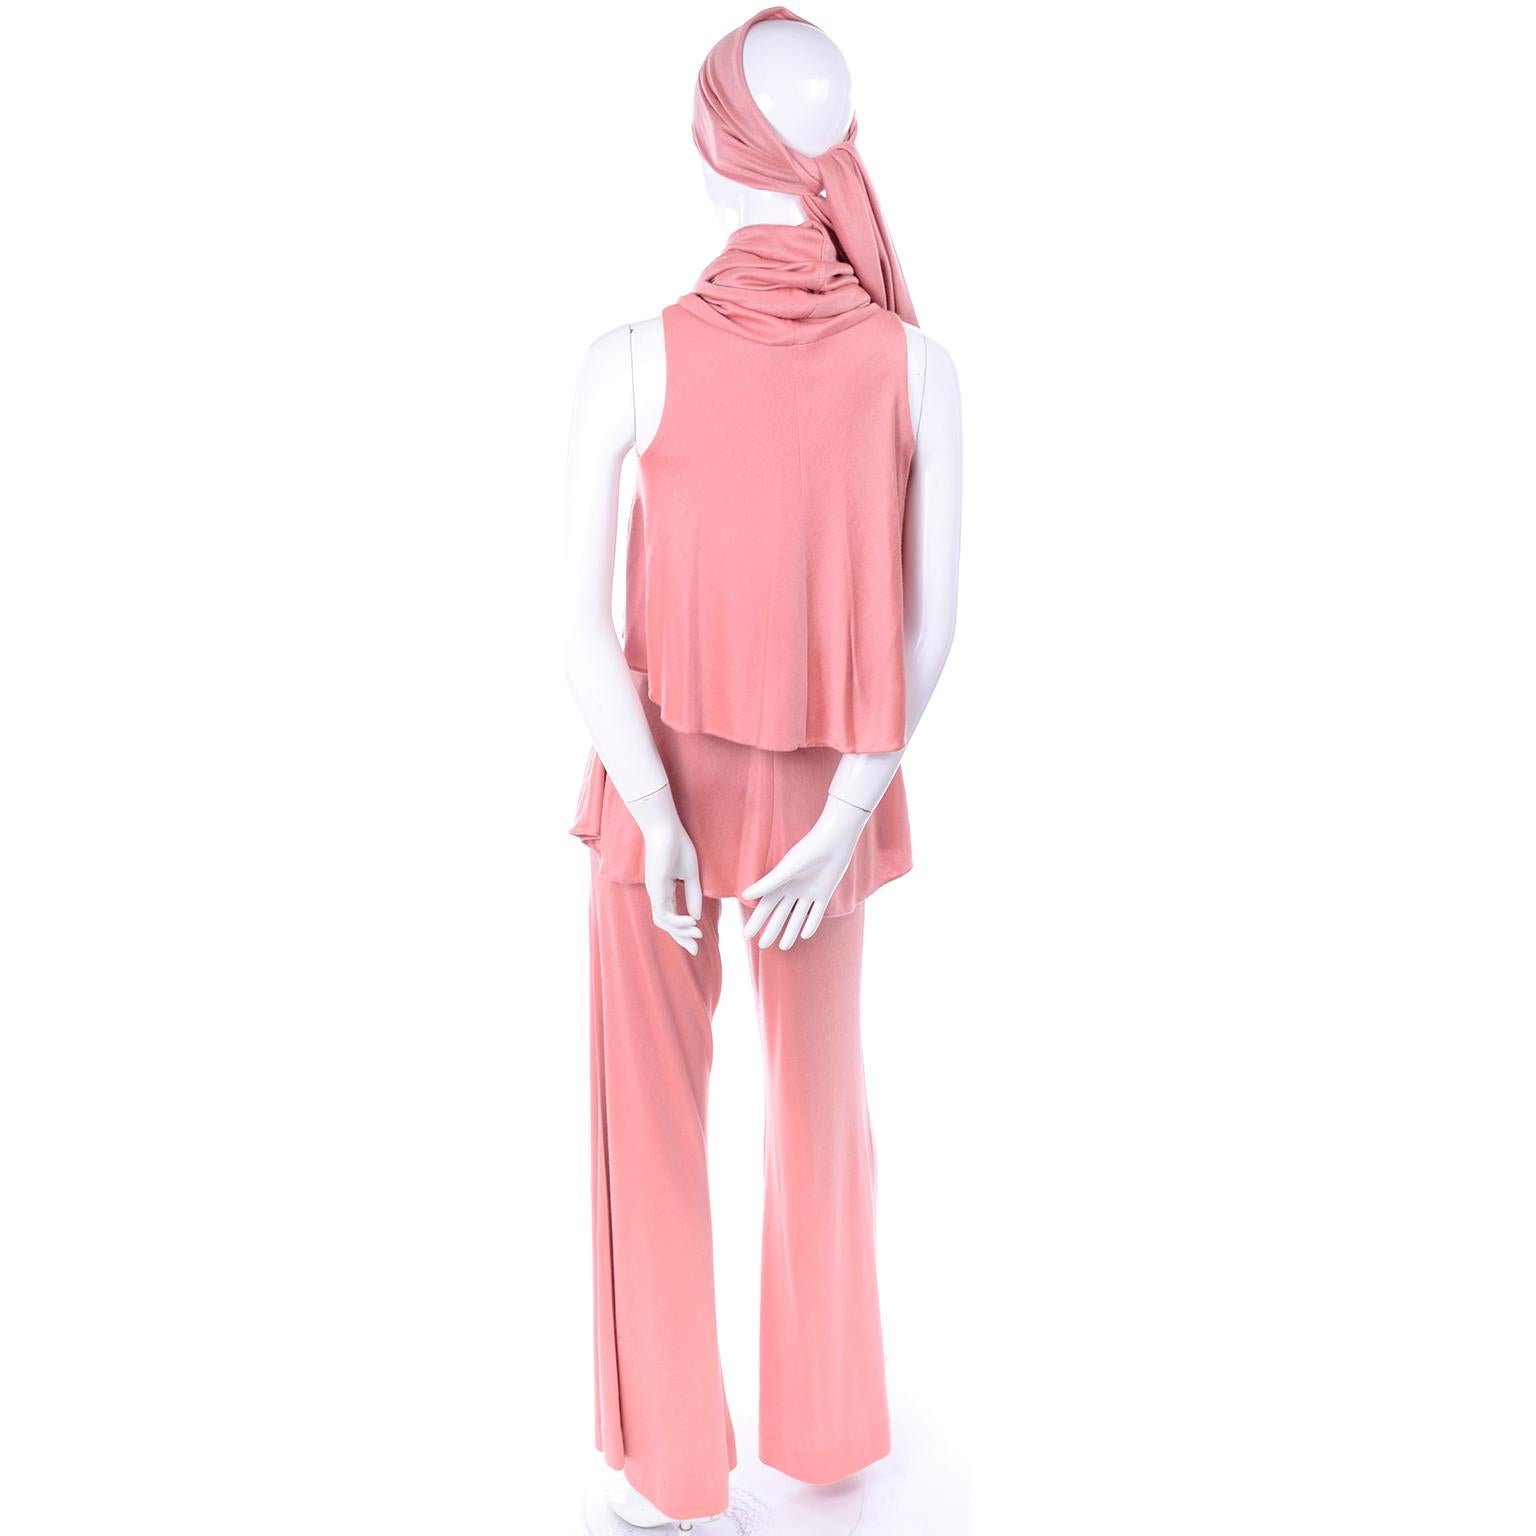 Adri Mary Adrienne Steckling Coen Vintage Coral Pink Outfit W Pants Top & Scarf 1